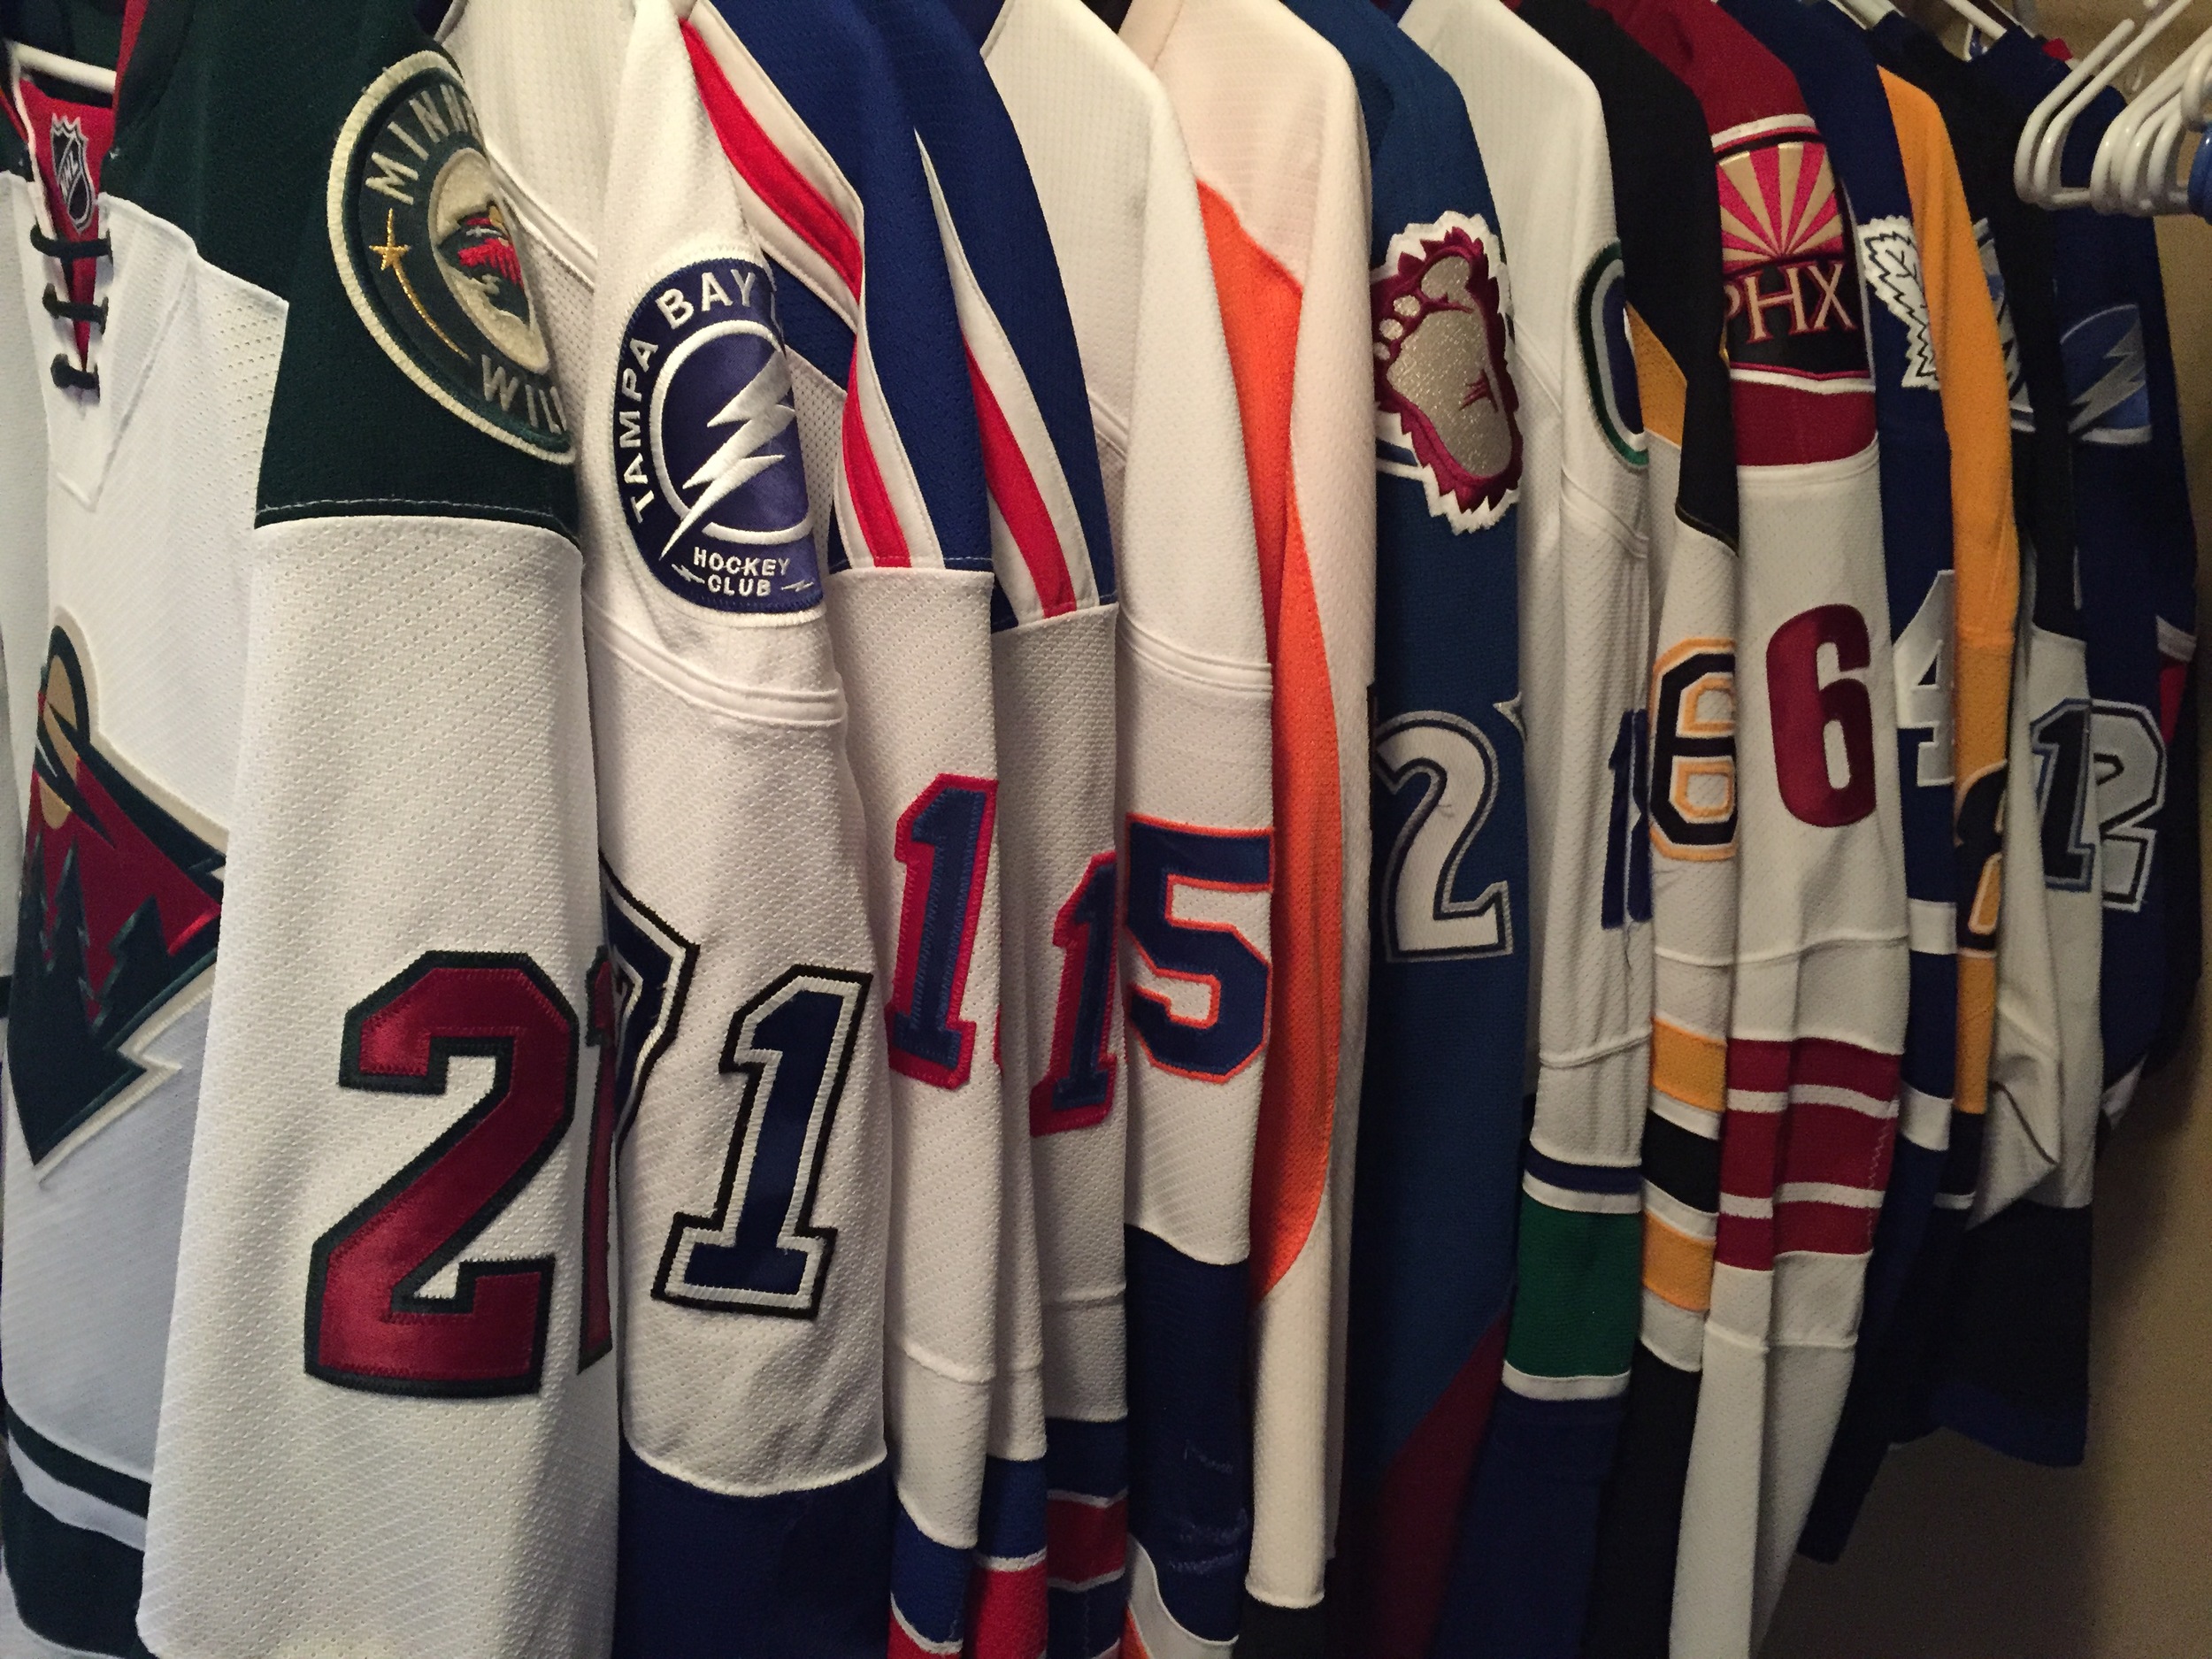 ohl game worn jerseys